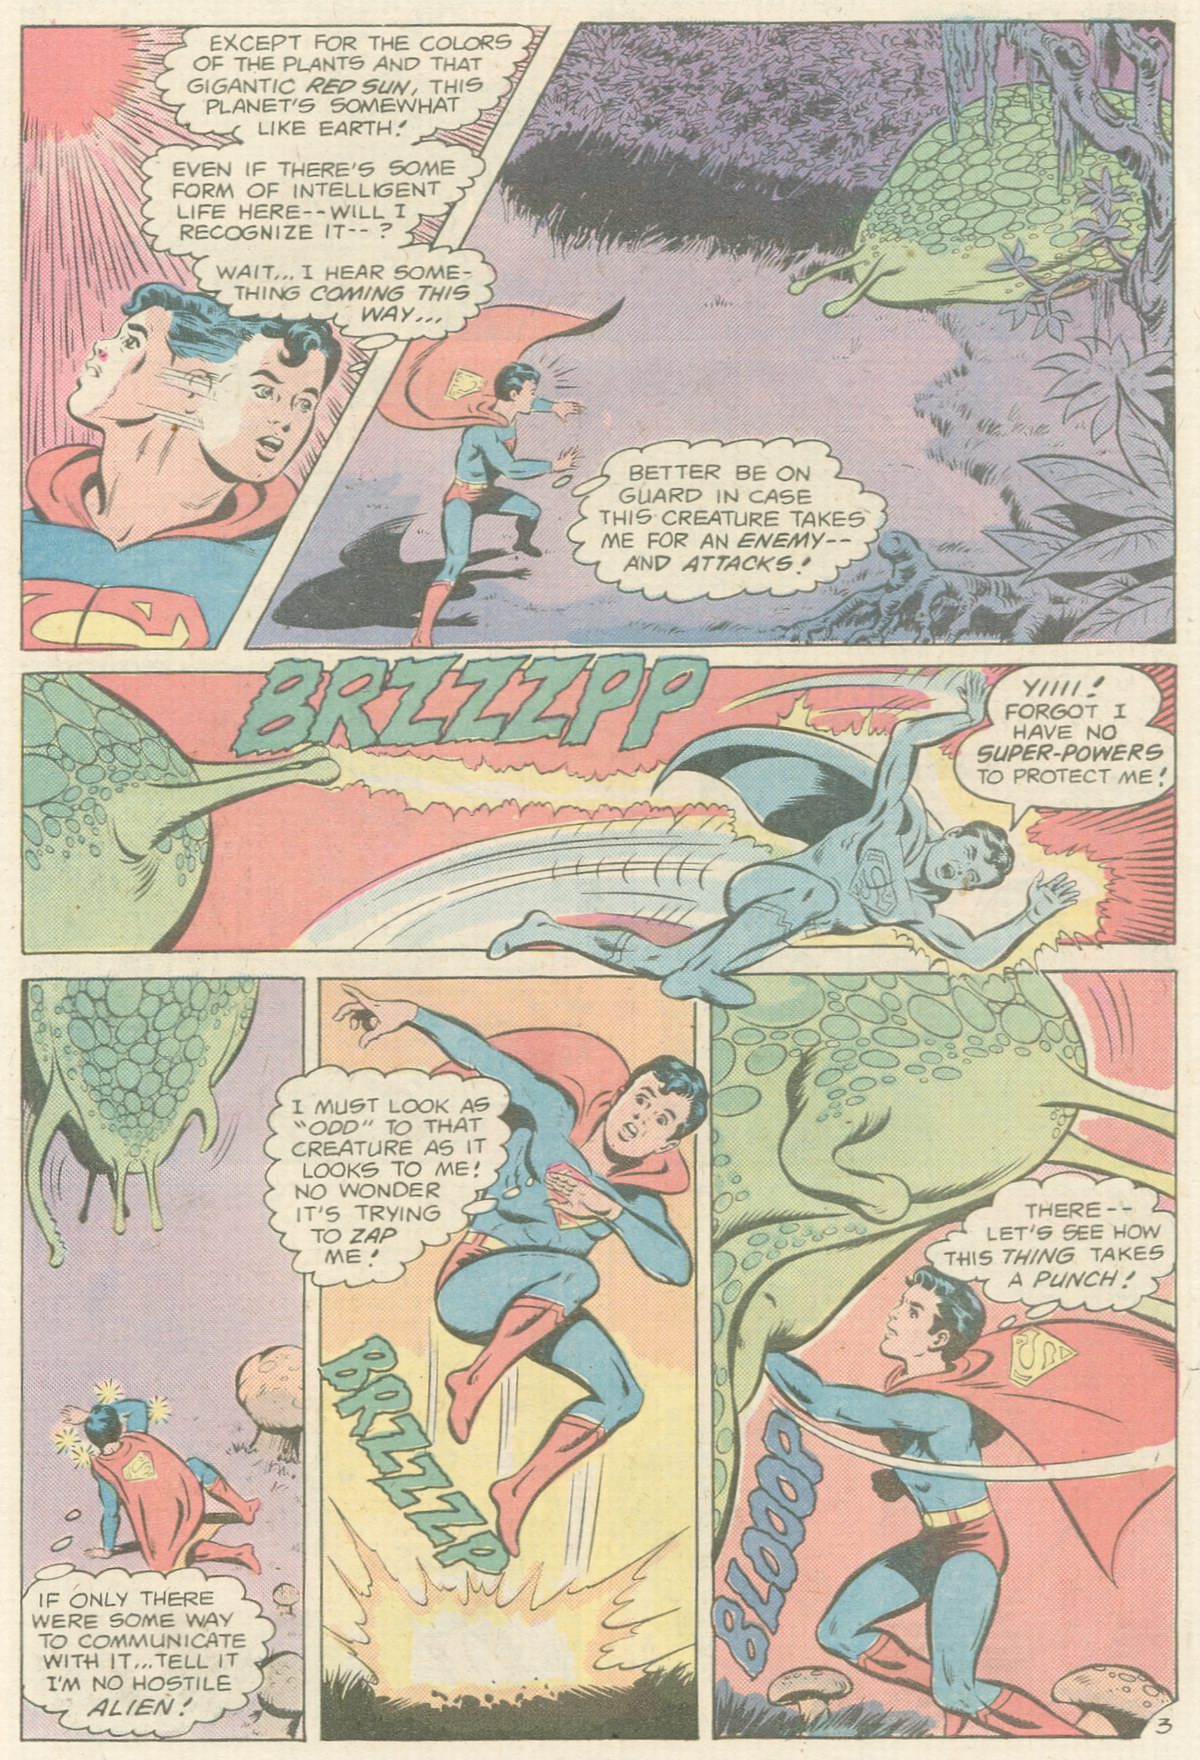 The New Adventures of Superboy 20 Page 20